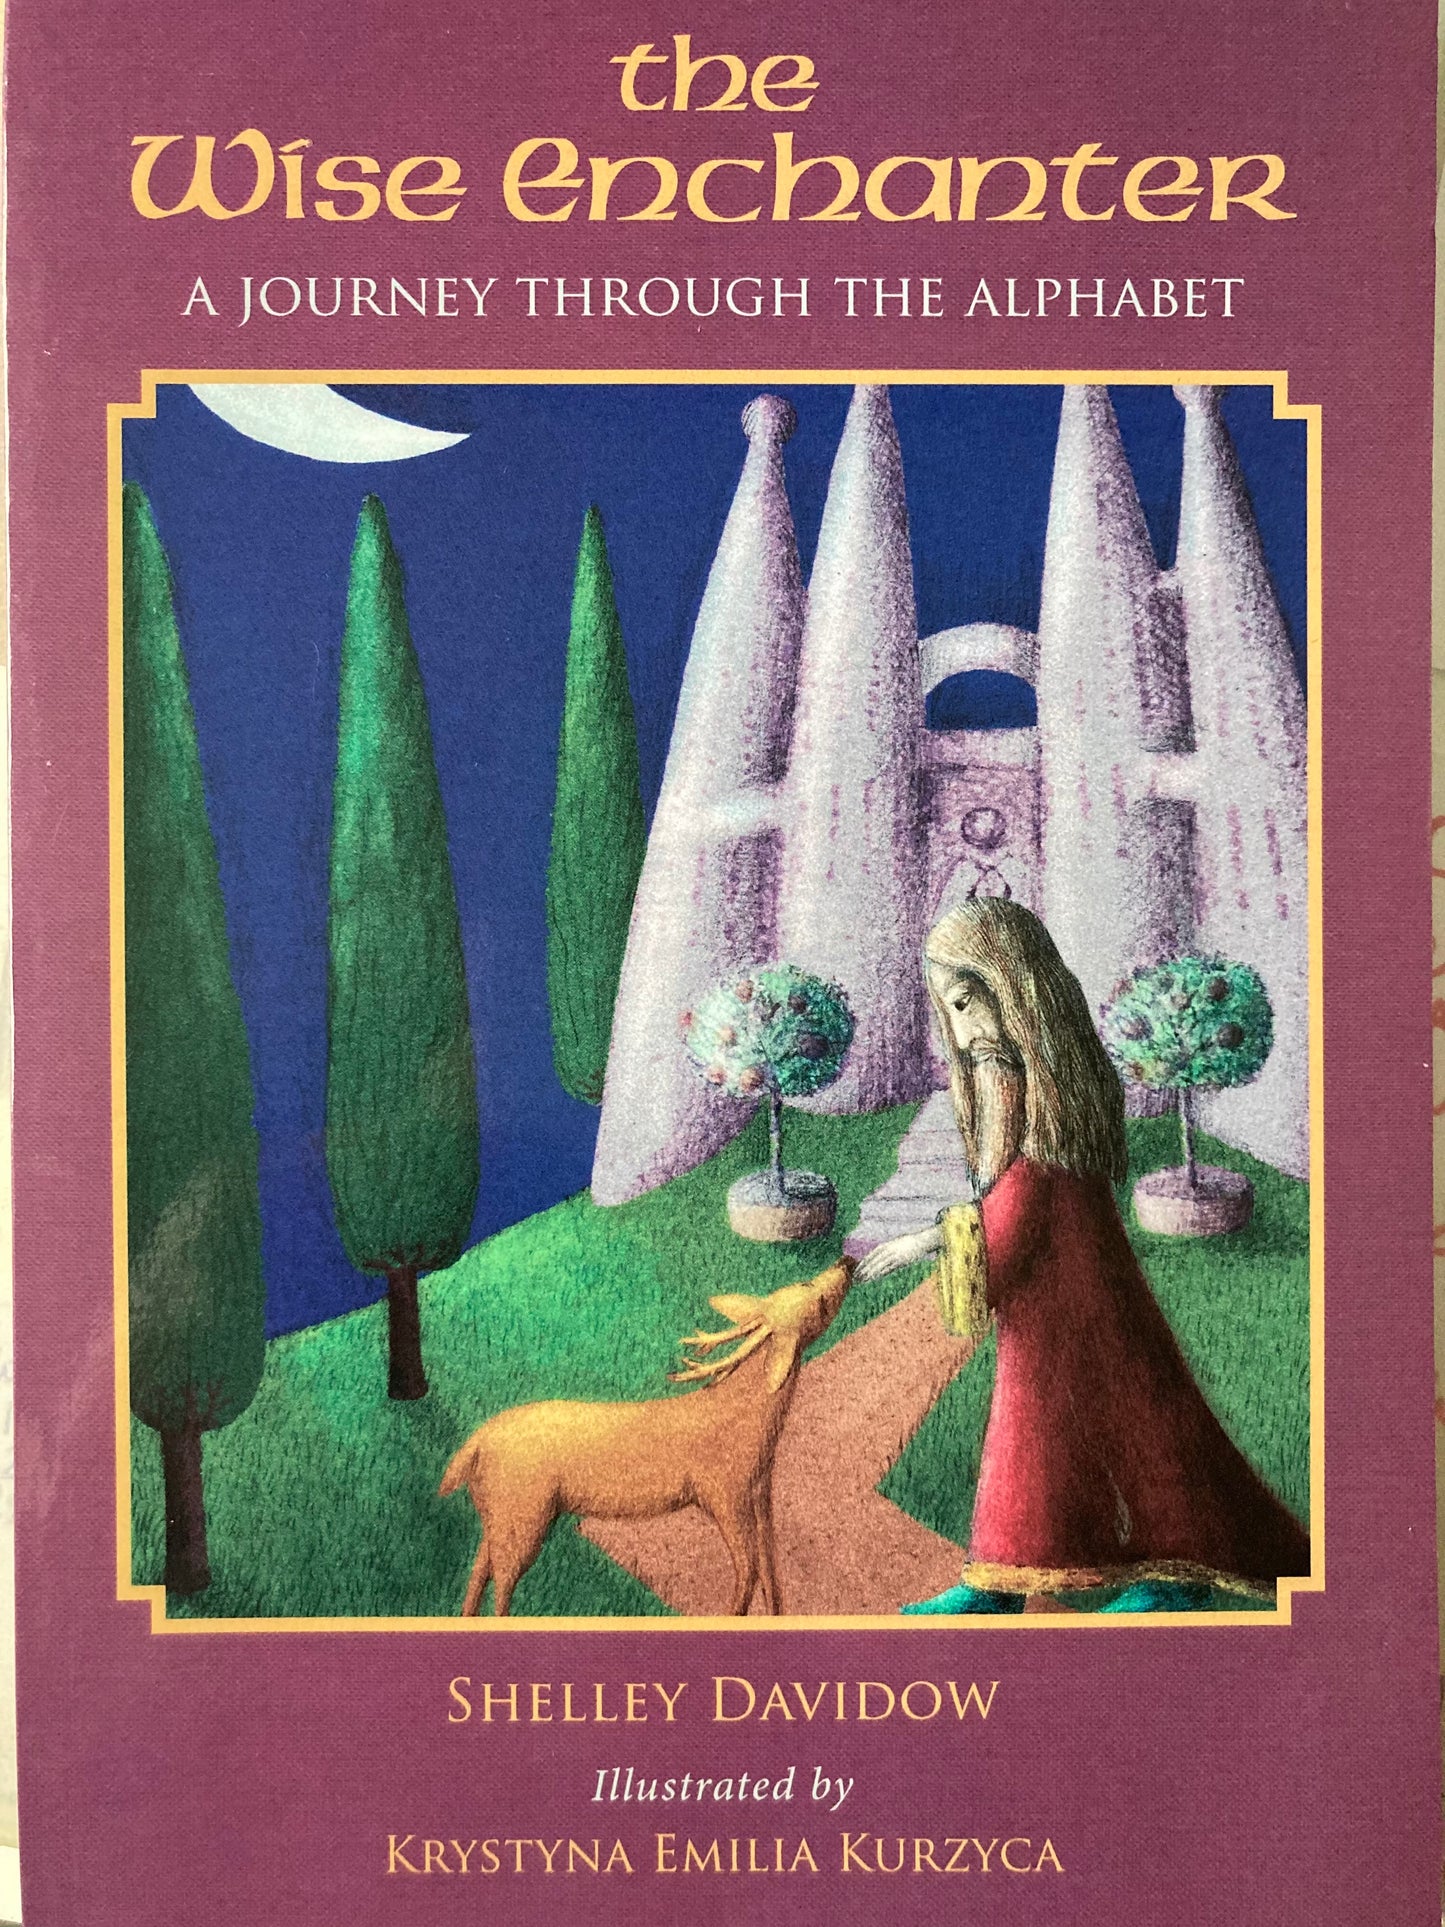 Educational Chapter Book - THE WISE ENCHANTER (A Journey through the Alphabet)